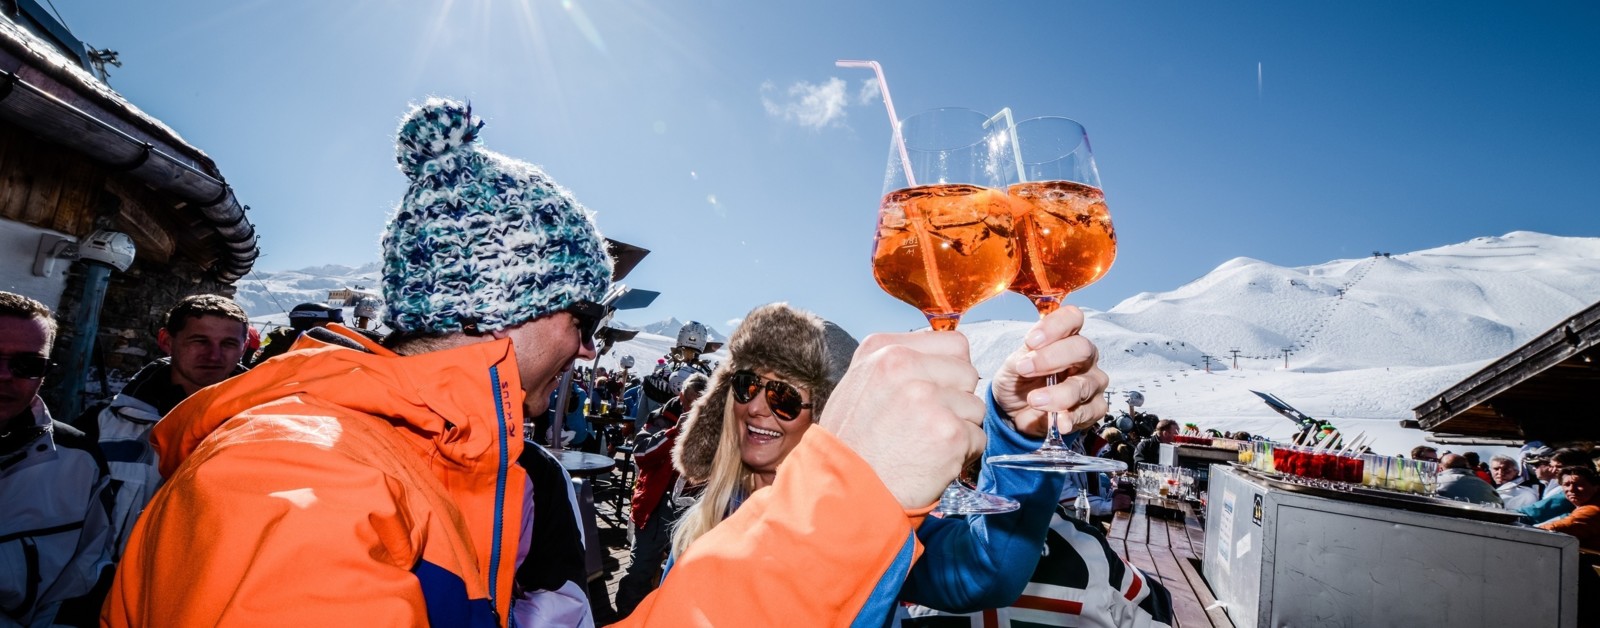 Après-Ski in Austria ➢ Find the best places to eat & party